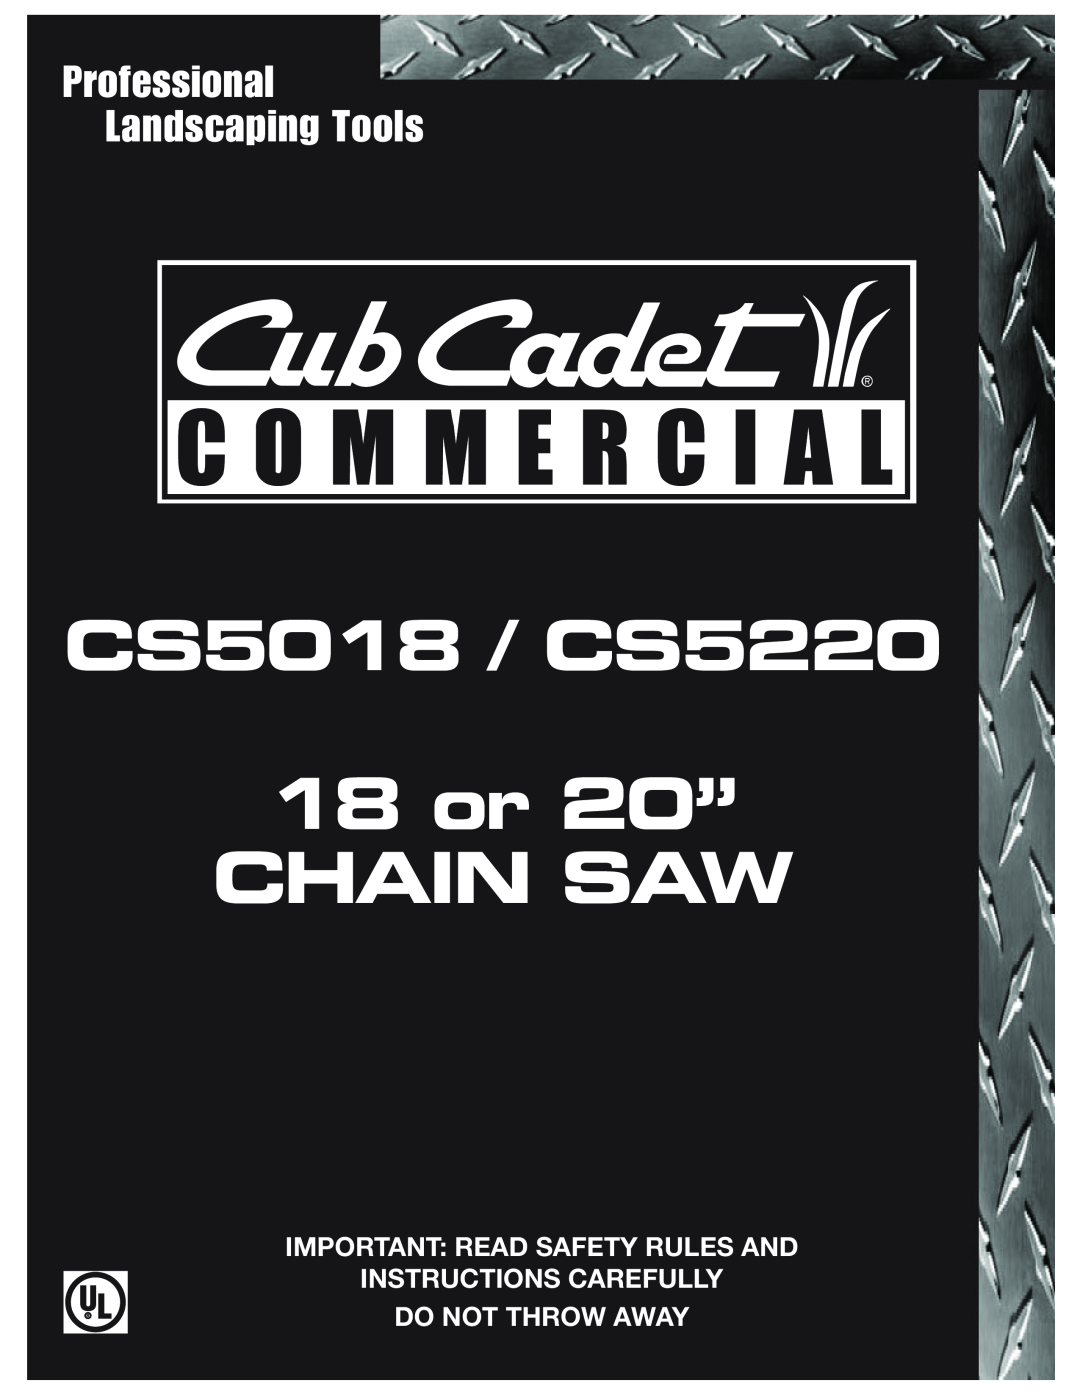 Cub Cadet manual 18 or 20” CHAIN SAW, CS5018 / CS5220, Professional Landscaping Tools, Important Read Safety Rules And 